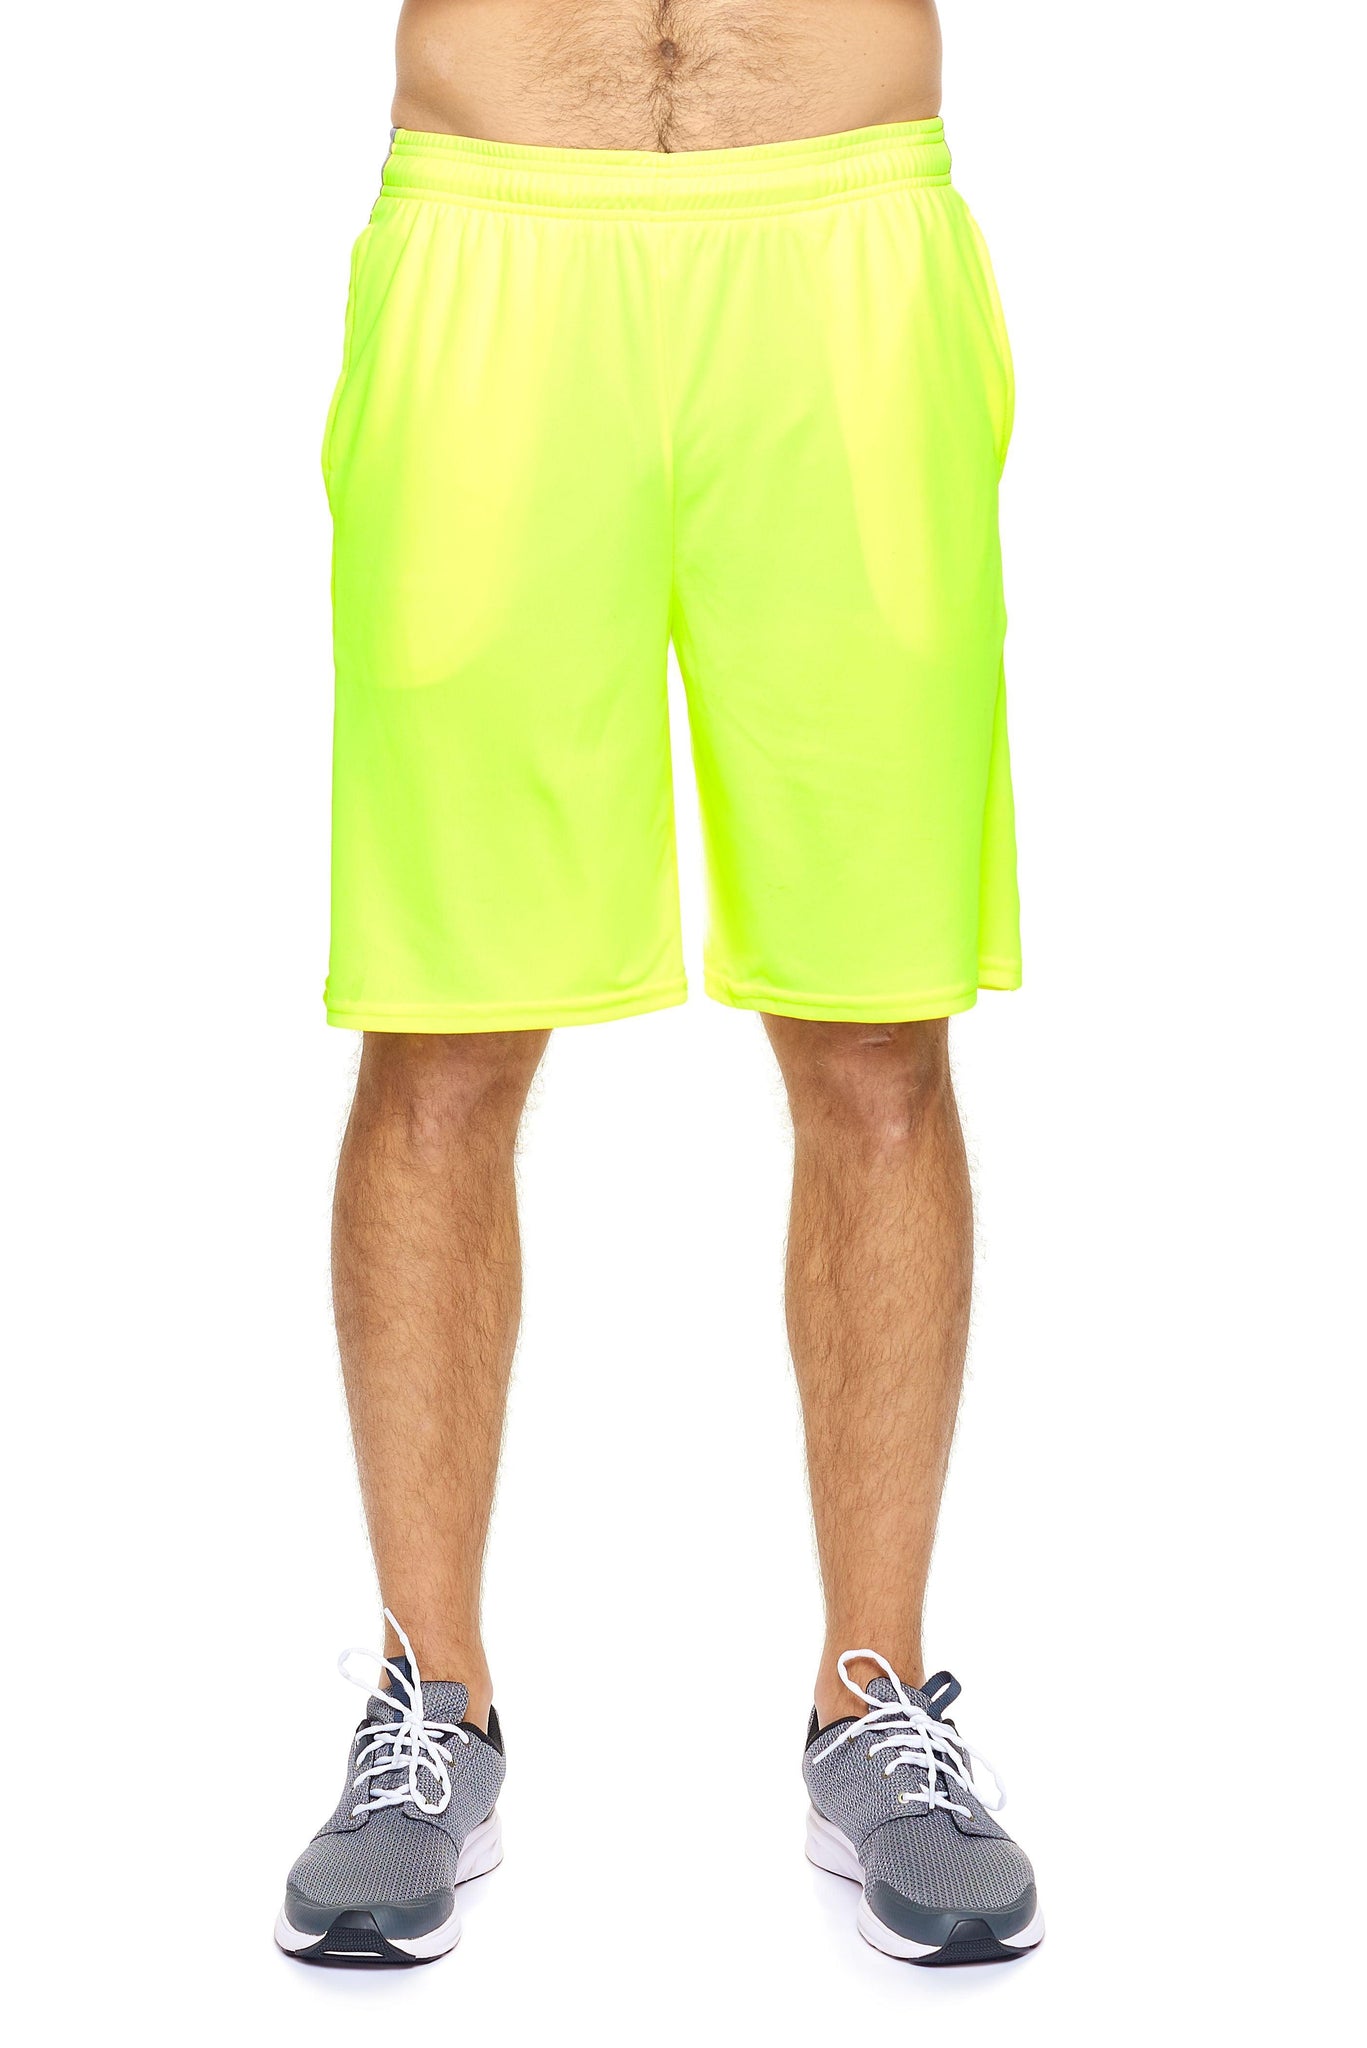 Expert Brand Men's Yellow Steel pk MaX™ Outdoor Shorts Image 2#safety-yellow-steel